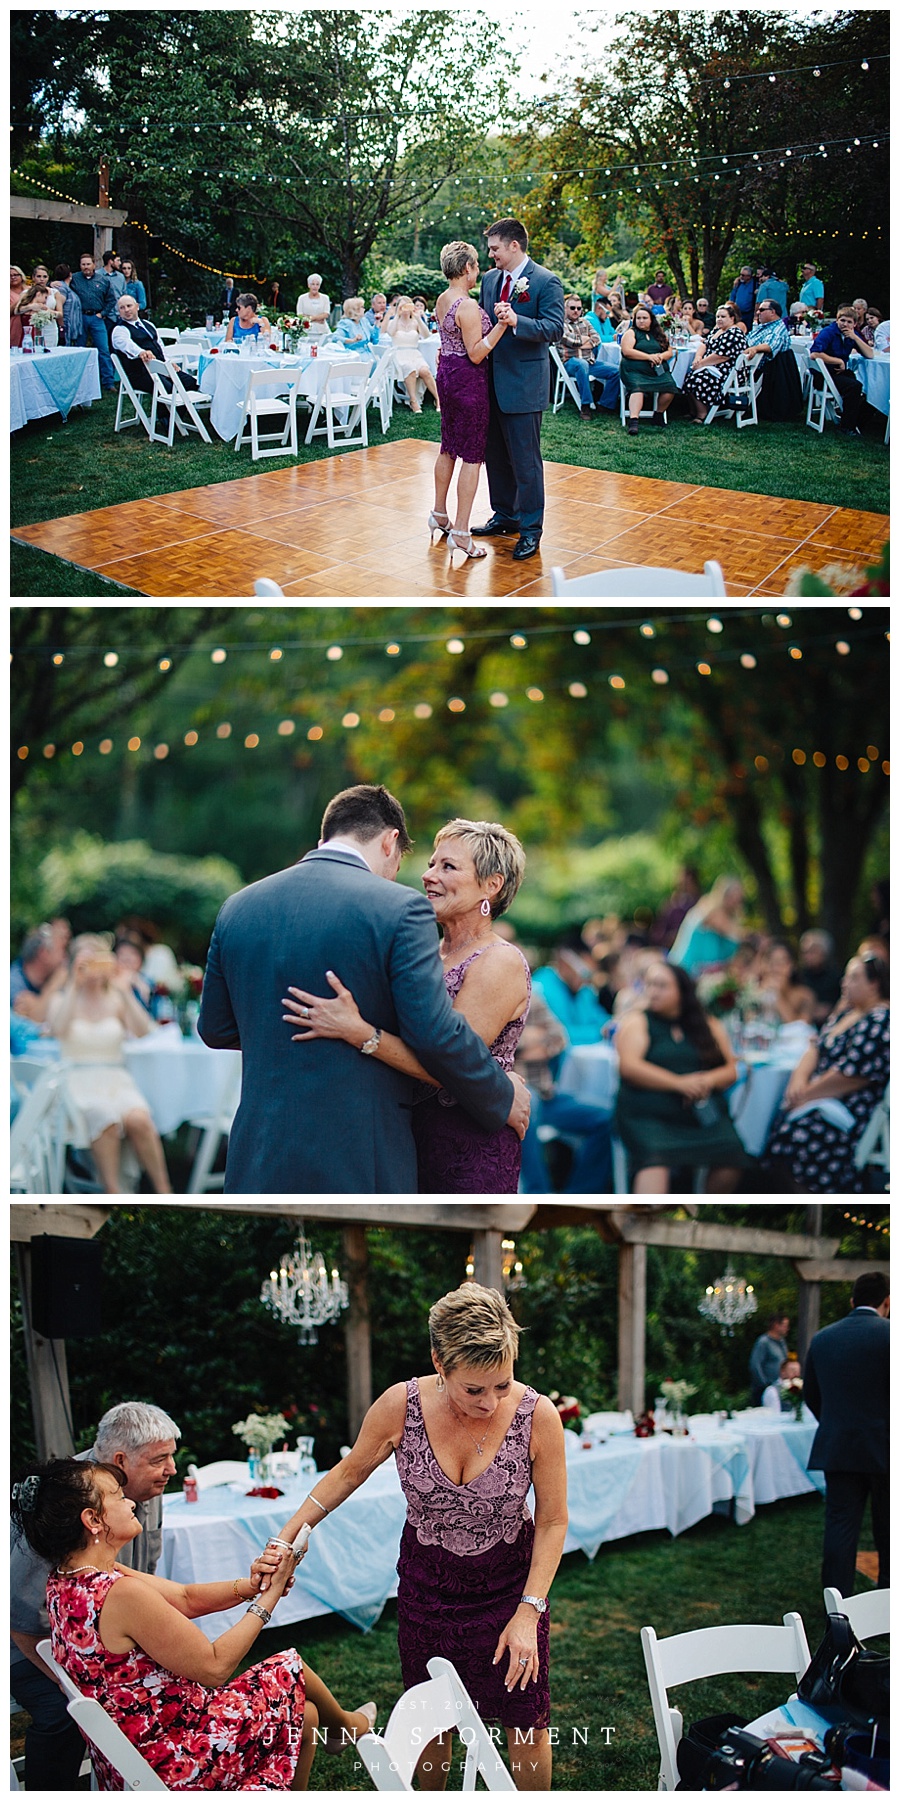 albees-garden-party-wedding-photos-by-jenny-storment-photography-120